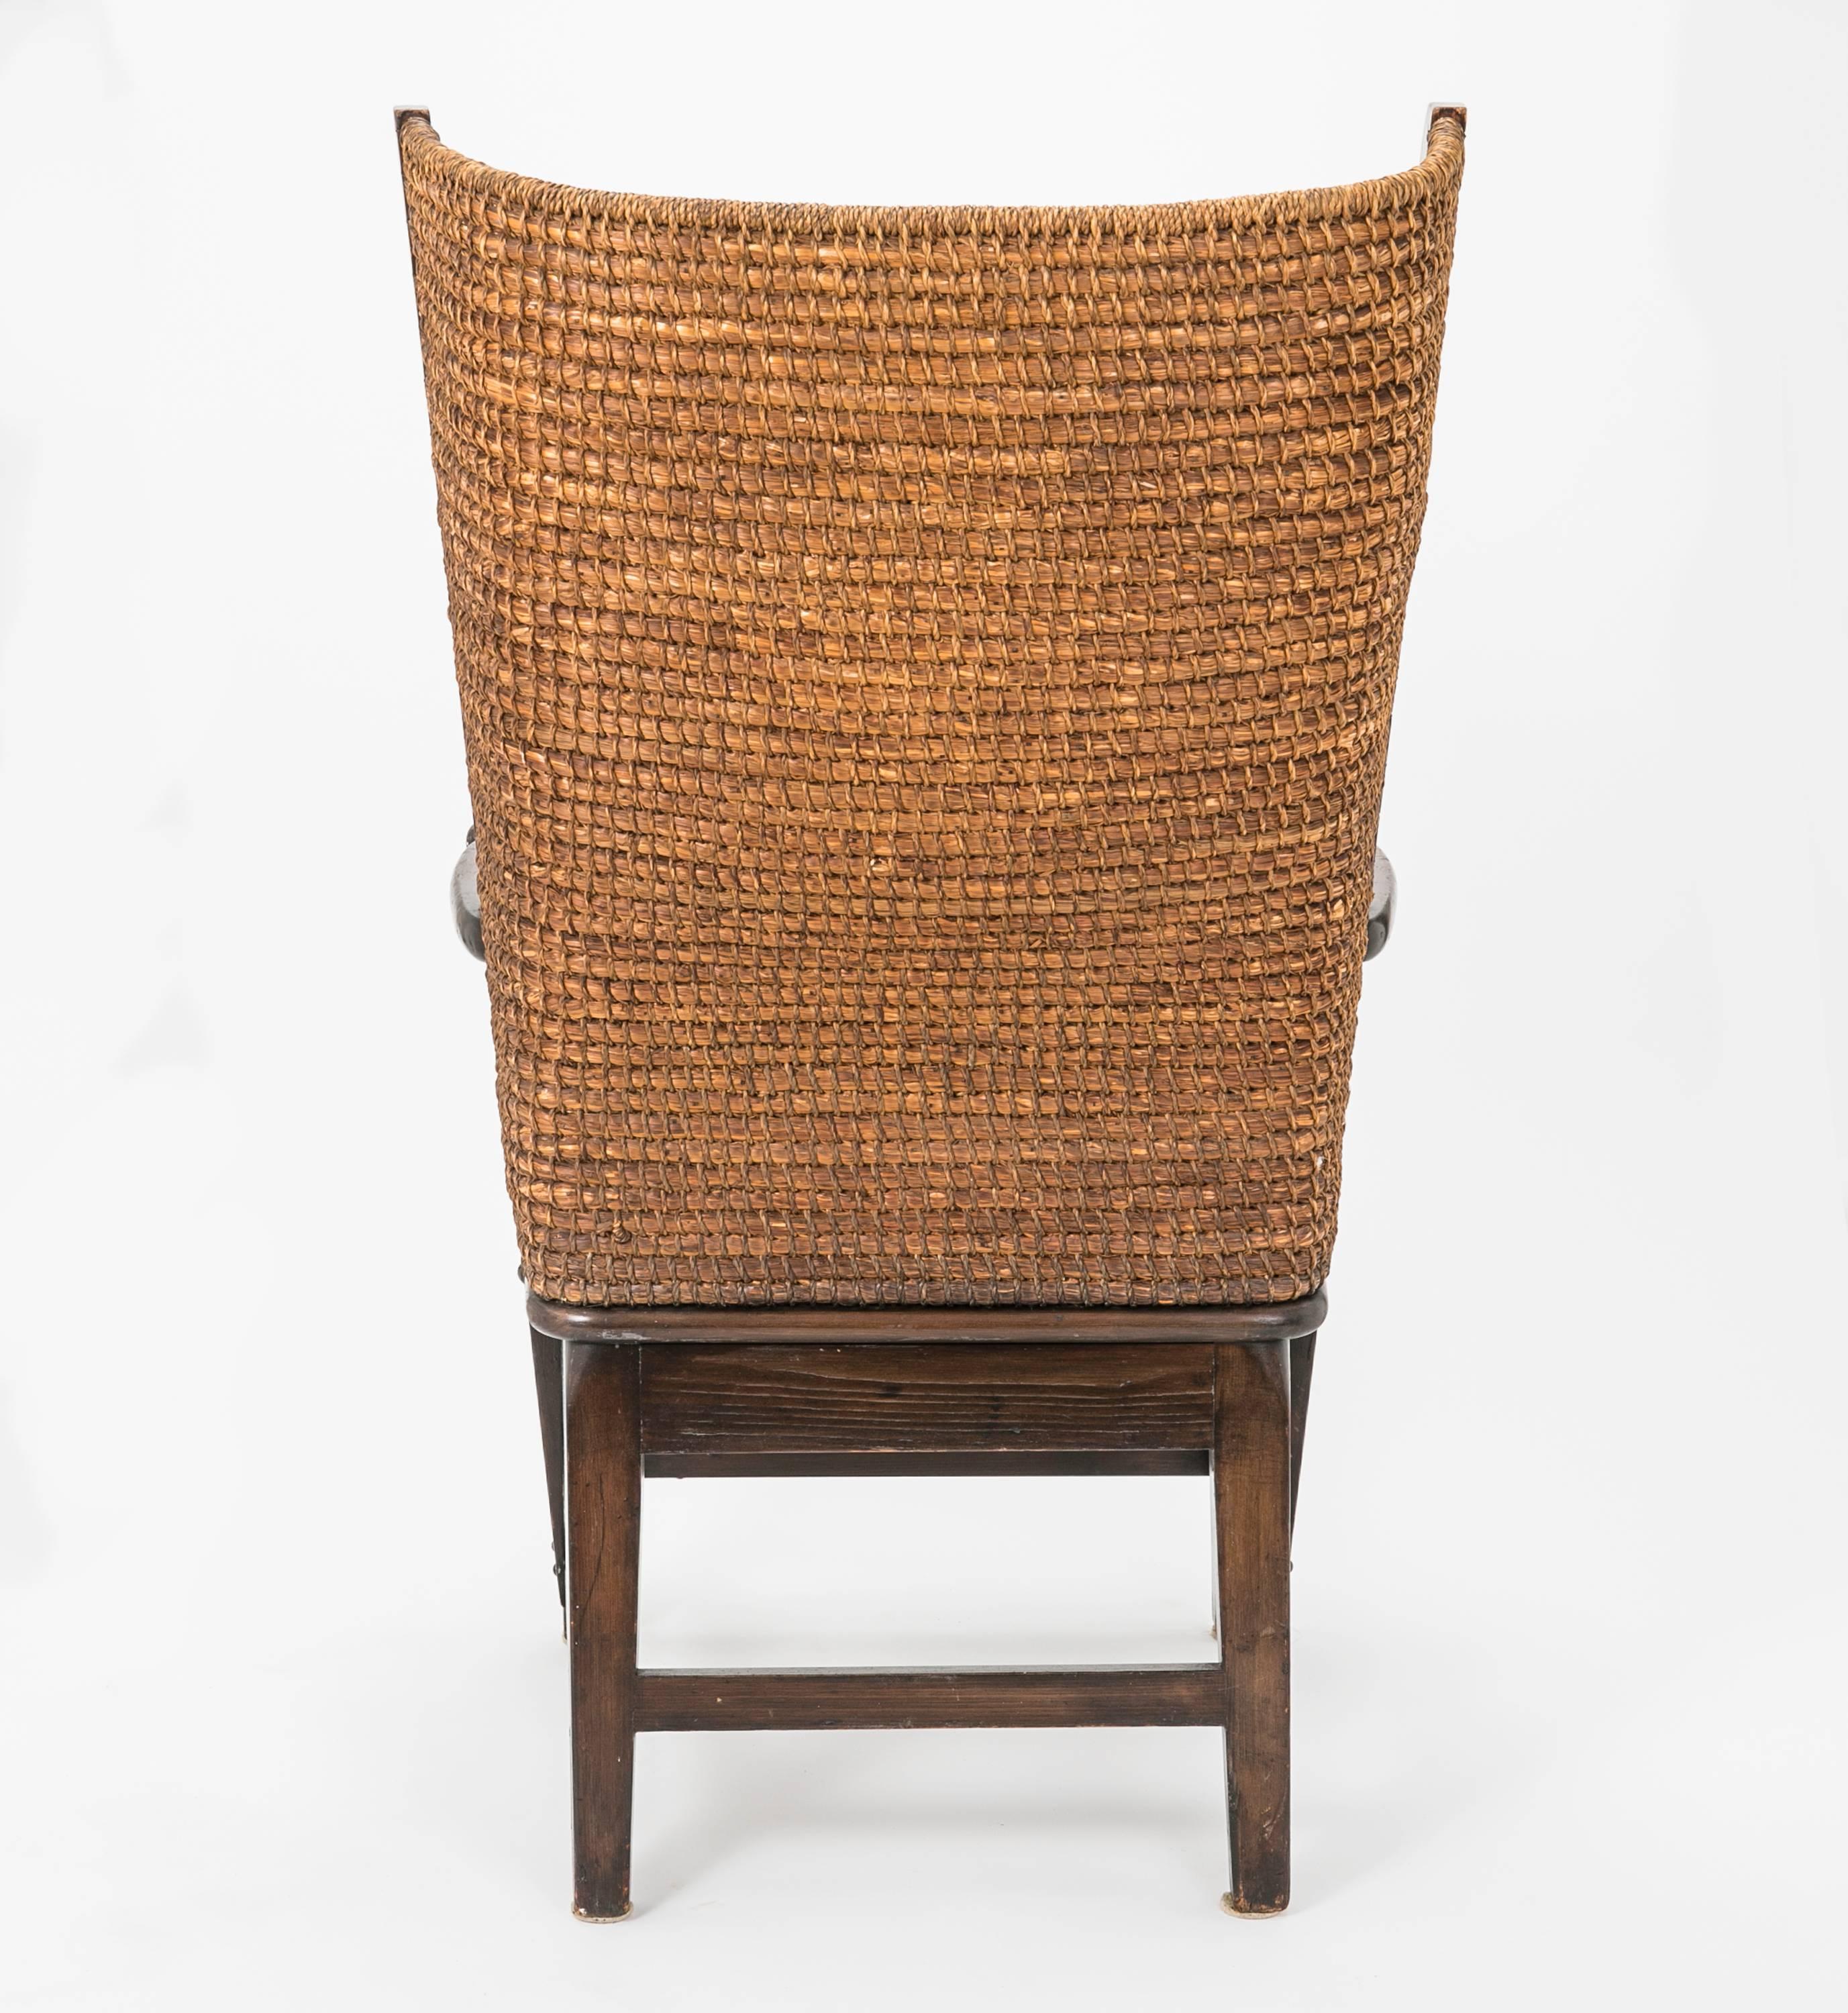 Seagrass Antique Rush Chair, Scottish Orkney